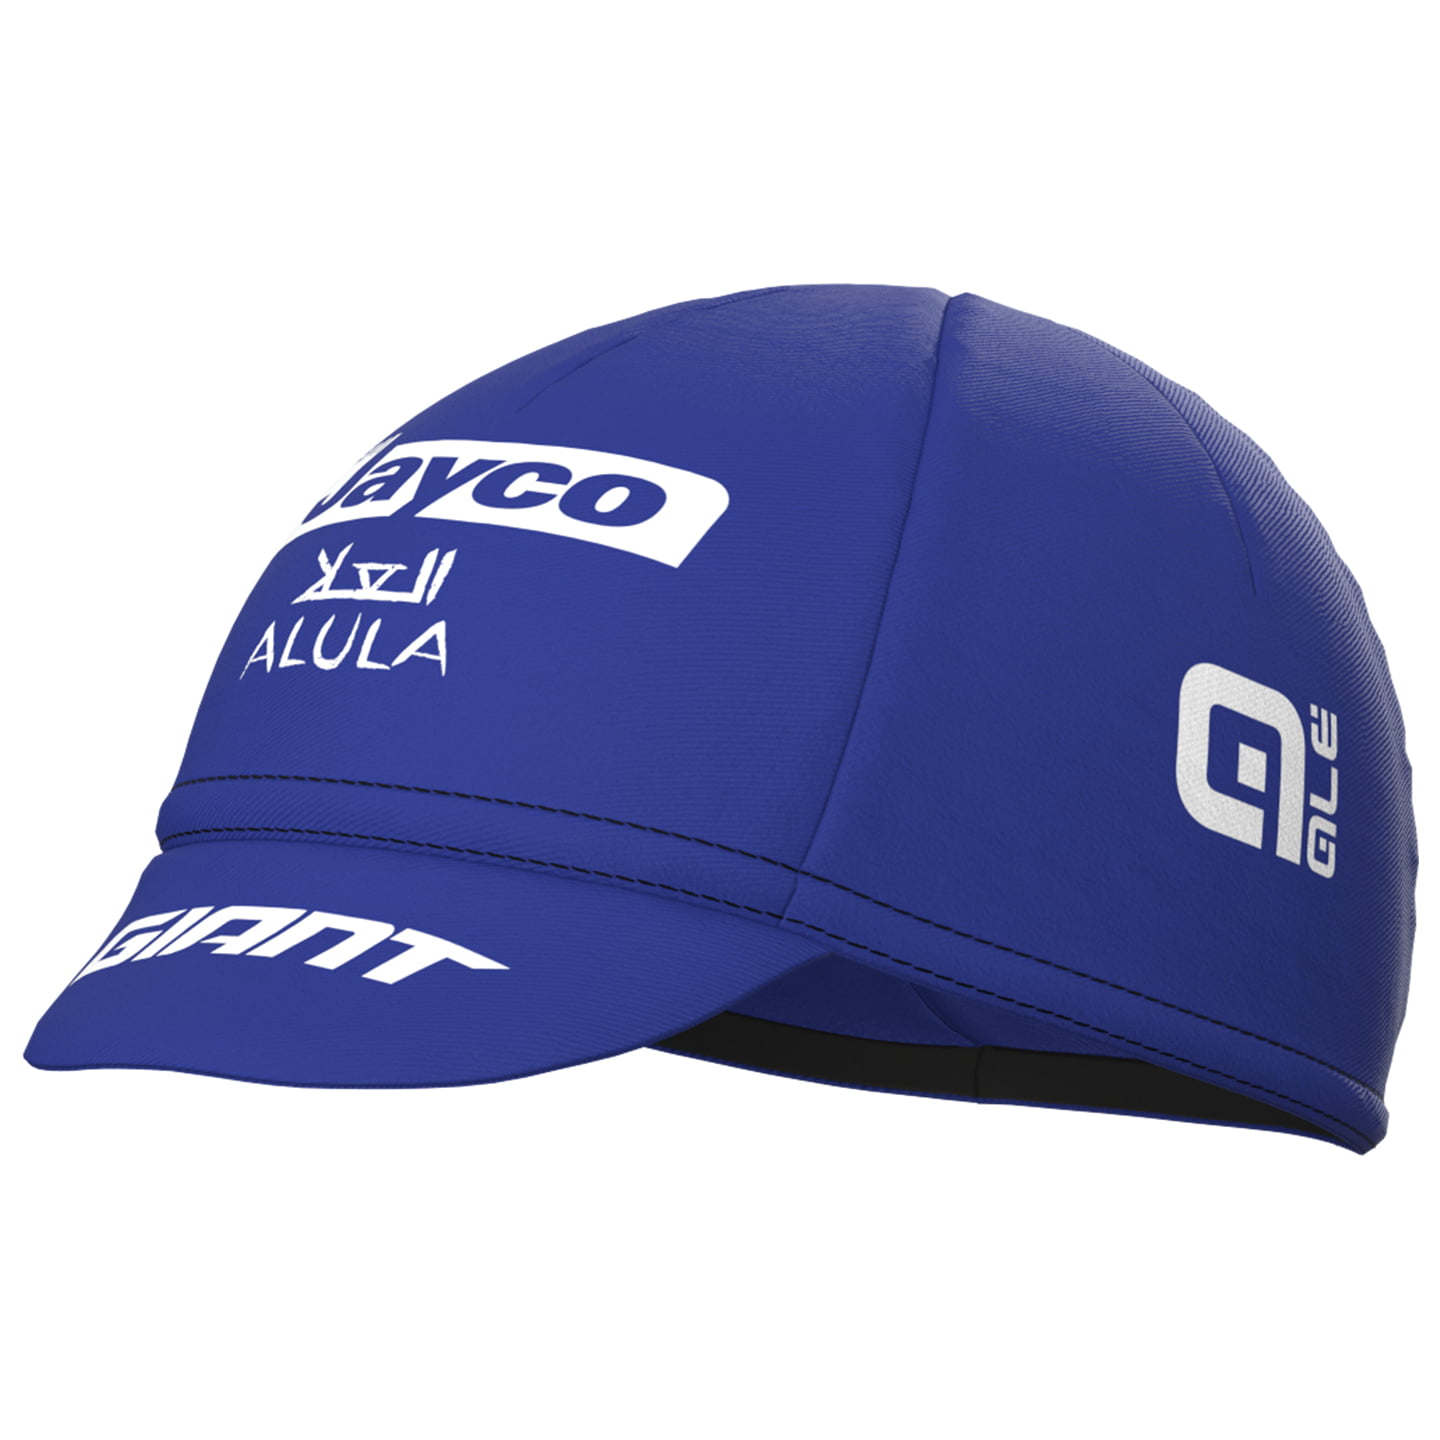 TEAM JAYCO-ALULA Cap 2023 Peaked Cycling Cap, for men, Cycle cap, Cycling clothing